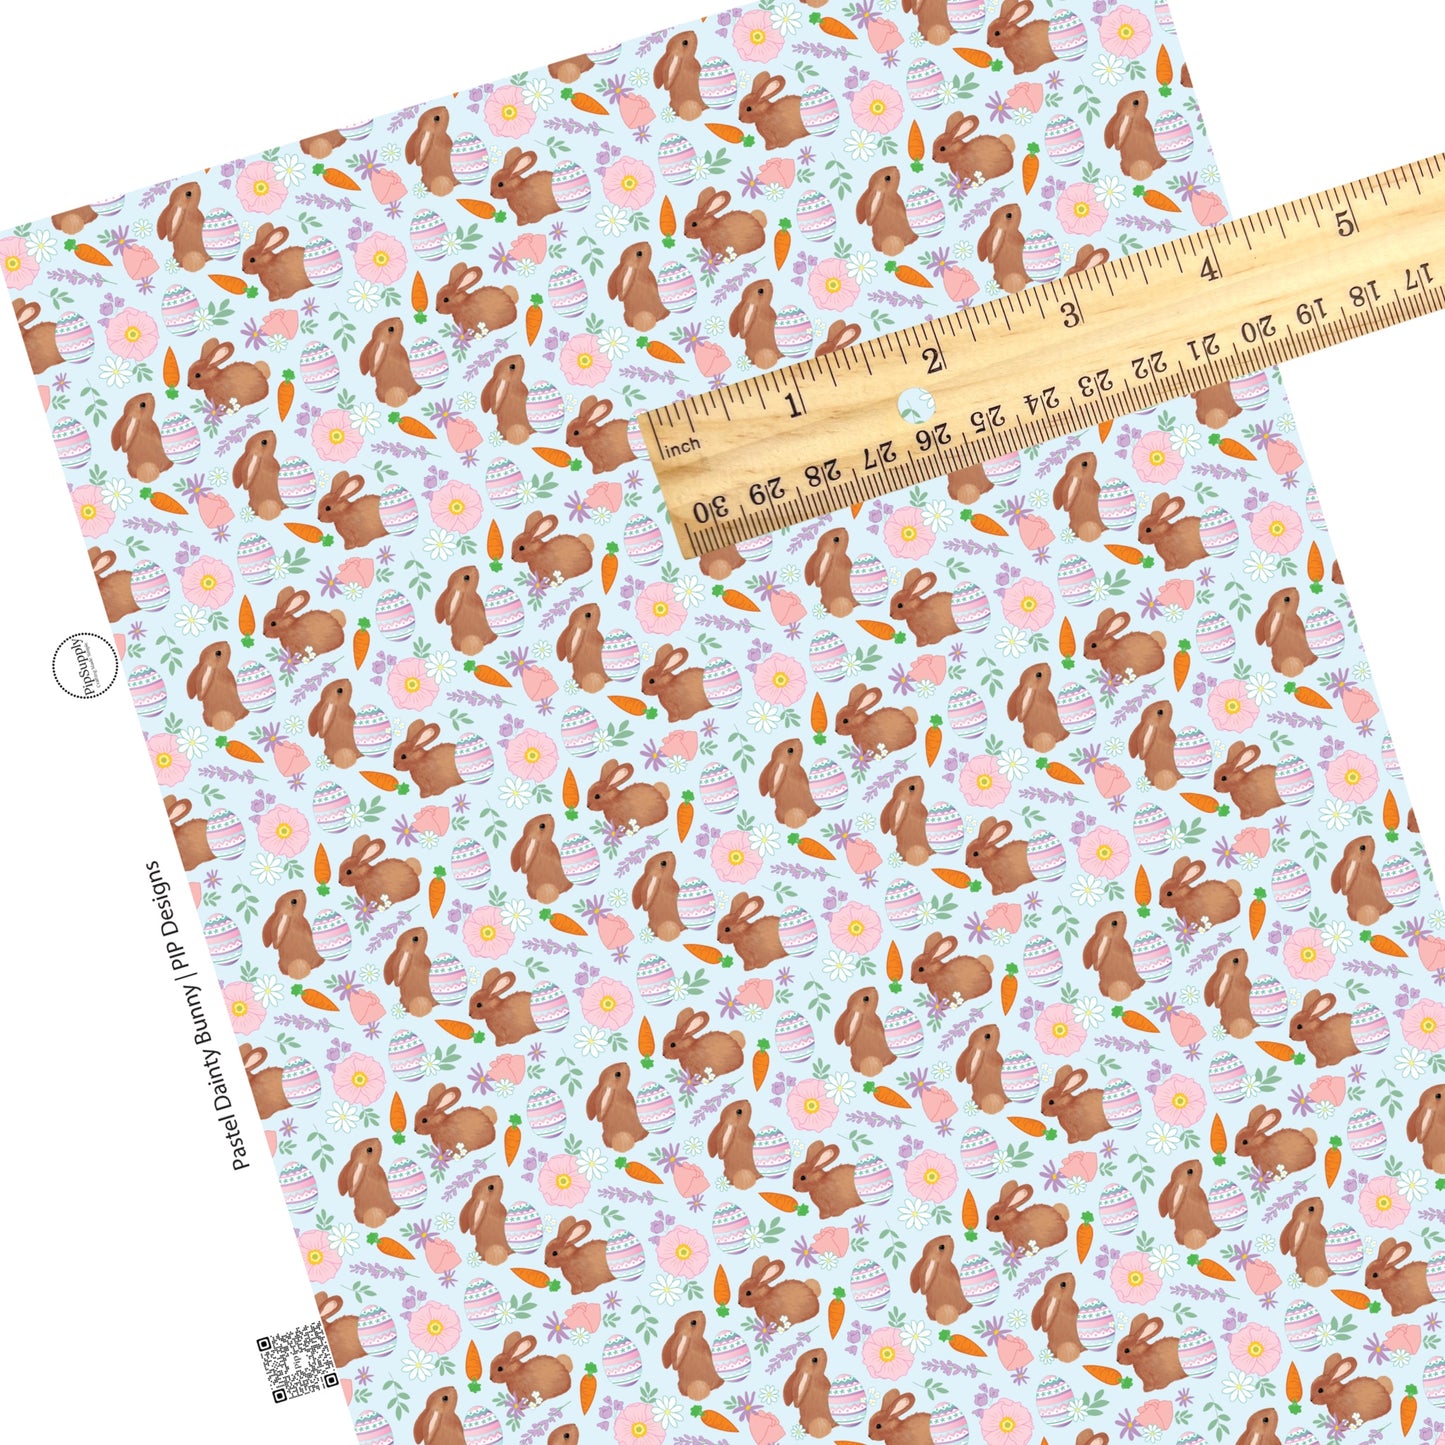 These Easter pattern themed faux leather sheets contain the following design elements: Easter eggs, bunnies, carrots, and flowers on light blue. Our CPSIA compliant faux leather sheets or rolls can be used for all types of crafting projects.